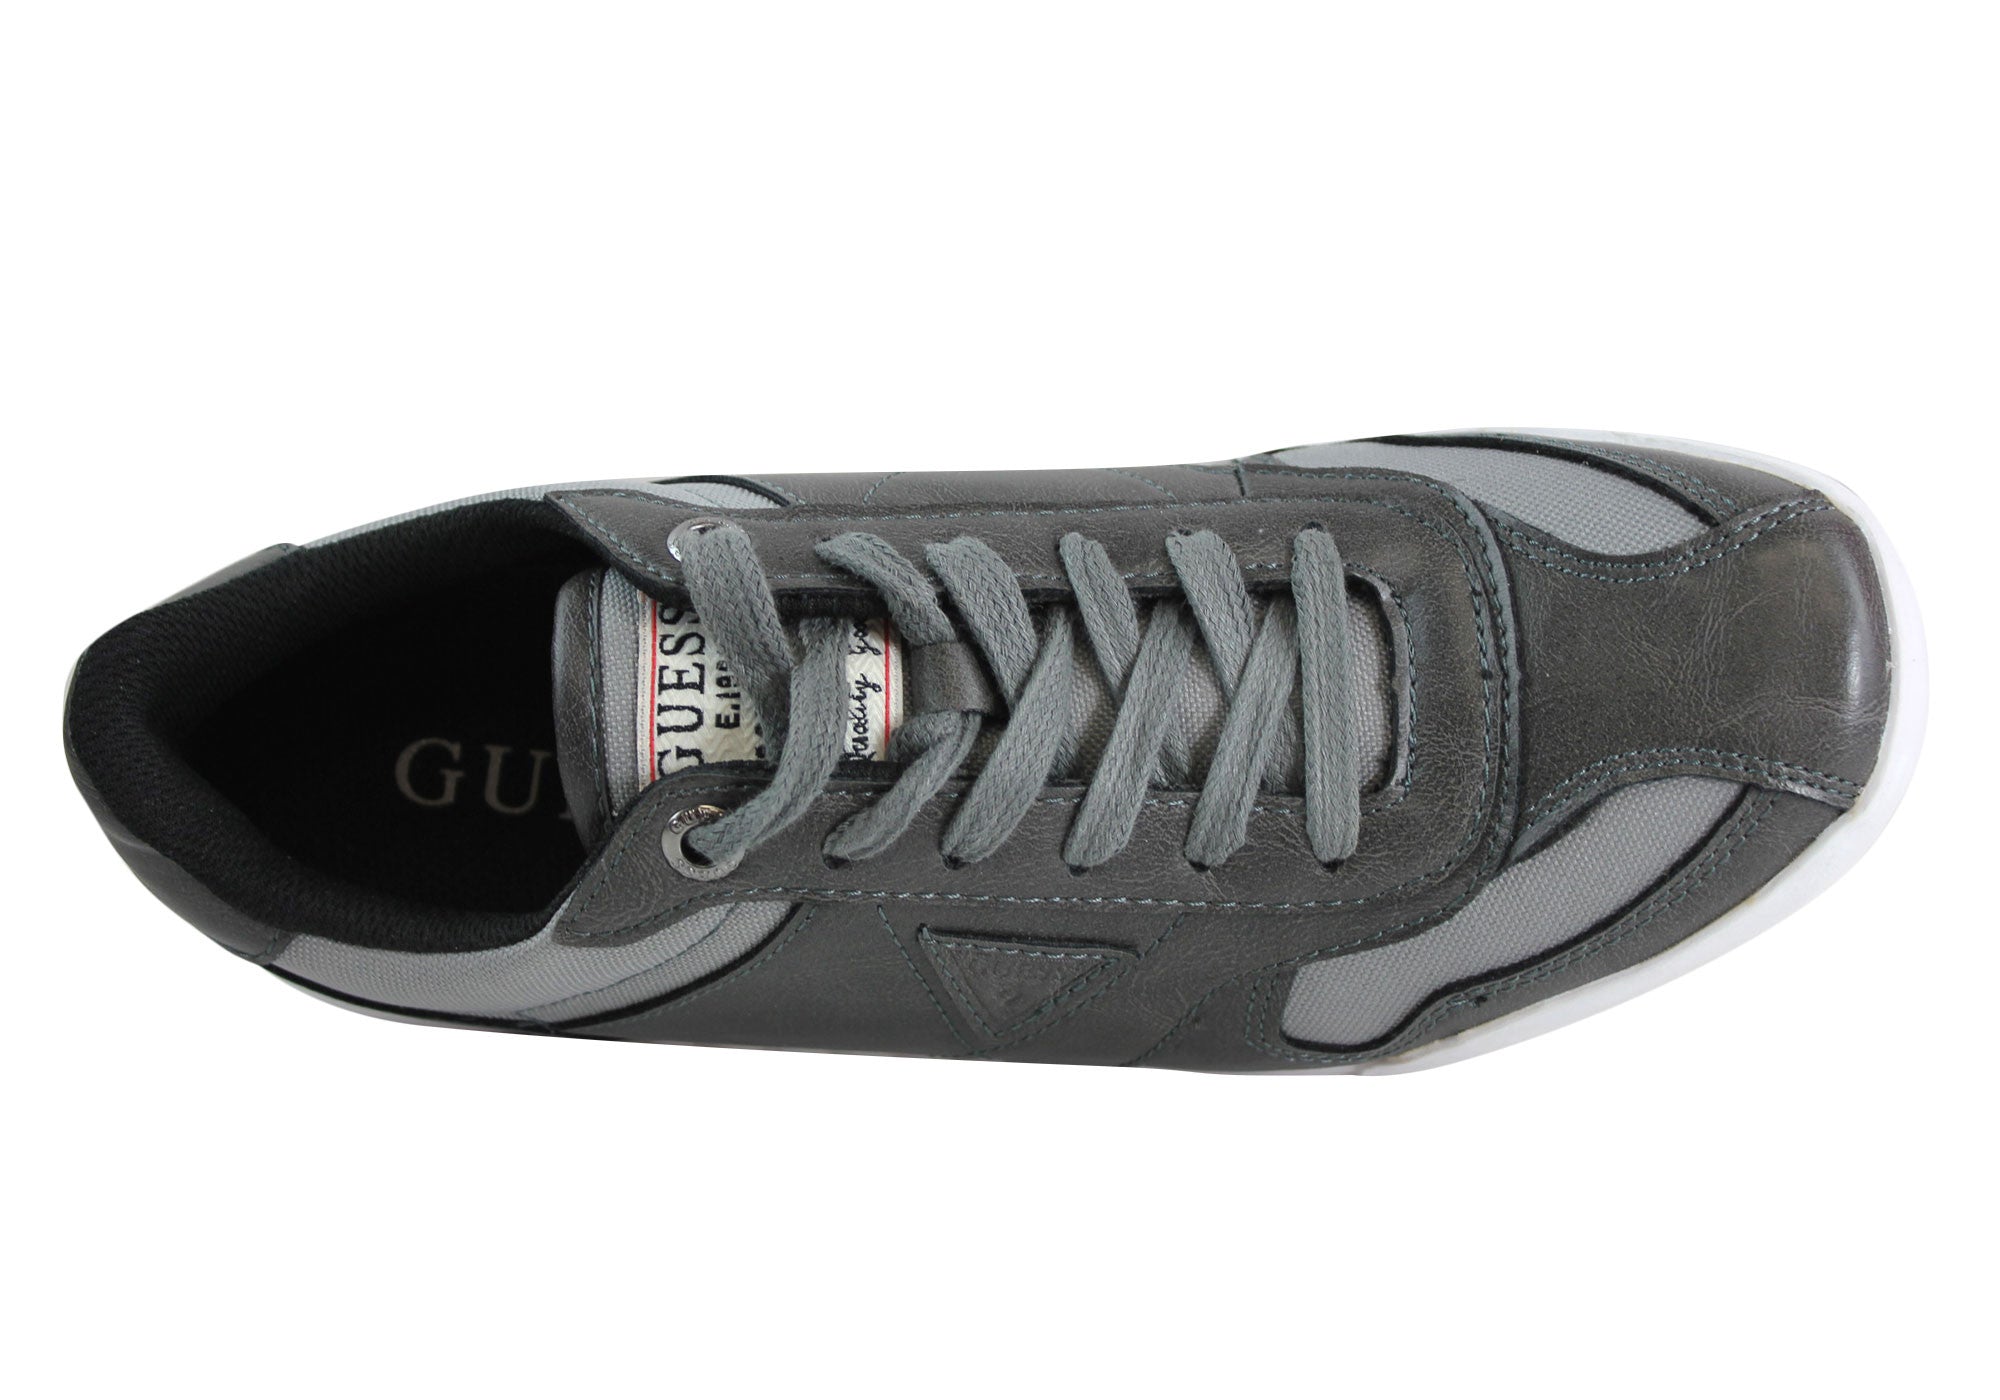 Guess Bartok Mens Comfortable Casual Lace Up Shoes